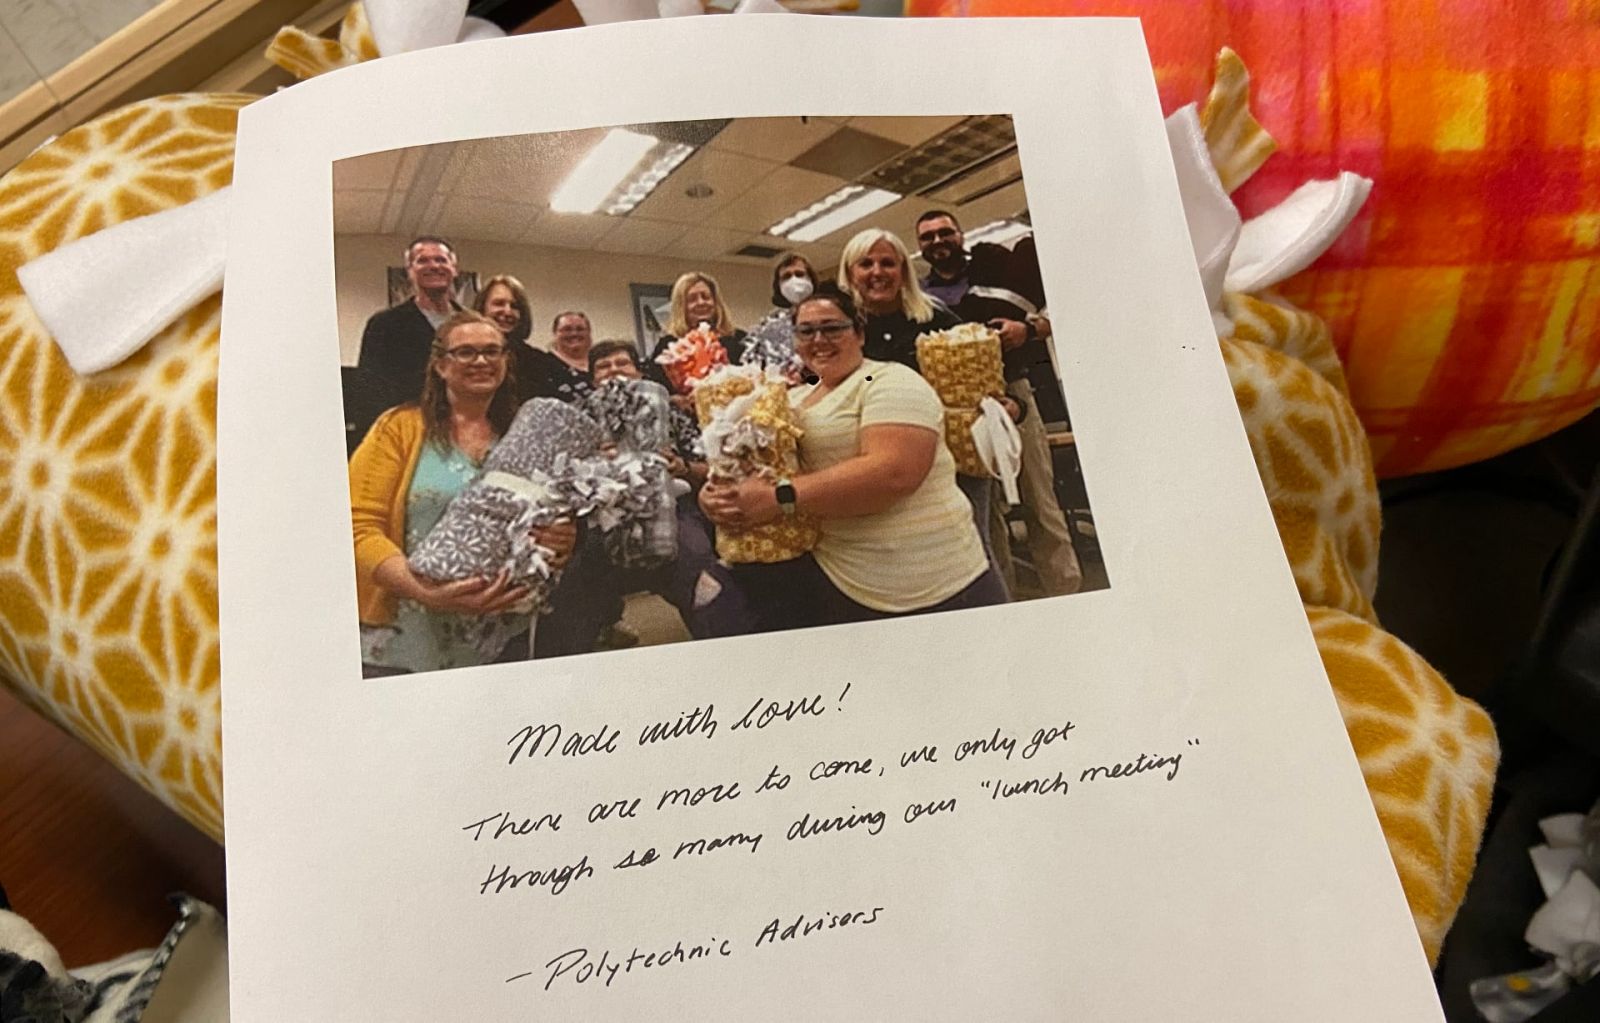 The Purdue Polytechnic Institute’s academic advising staff left a kind note for LaGrange atop their blanket donation. Pictured: Tami Lynch, T.R. Oneal, Aimee Griggs, Angie Murphy, Zach Oborne, Cassie Pendleton, Susan Hockings, Melody Carducci, Heather Mayorga, and Jill Lloyd-Crucini. The note reads, "Made with love! There are more to come. We only got through so many during our 'lunch meeting.' —Polytechnic Advisors" (Photo provided)